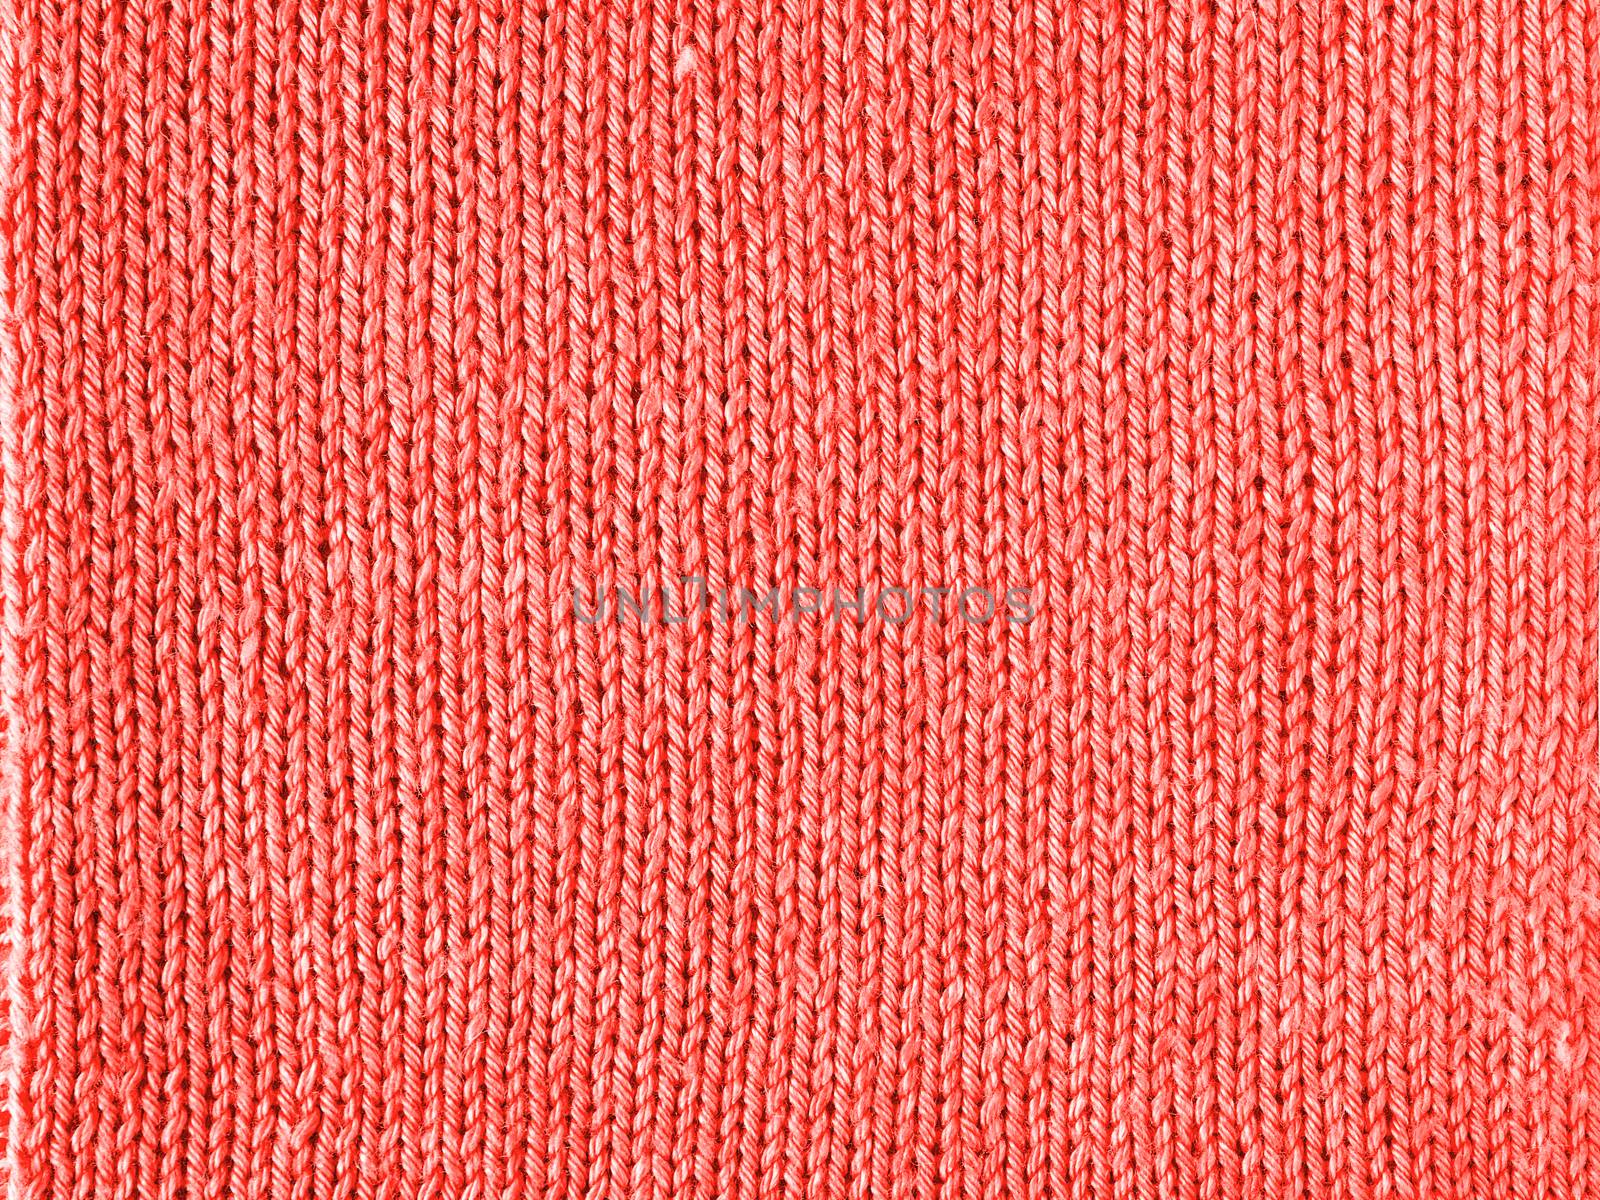 Living Coral color knitted Jersey as a textile background. Knitted Living Coral texture. Color of the year 2019 concept.